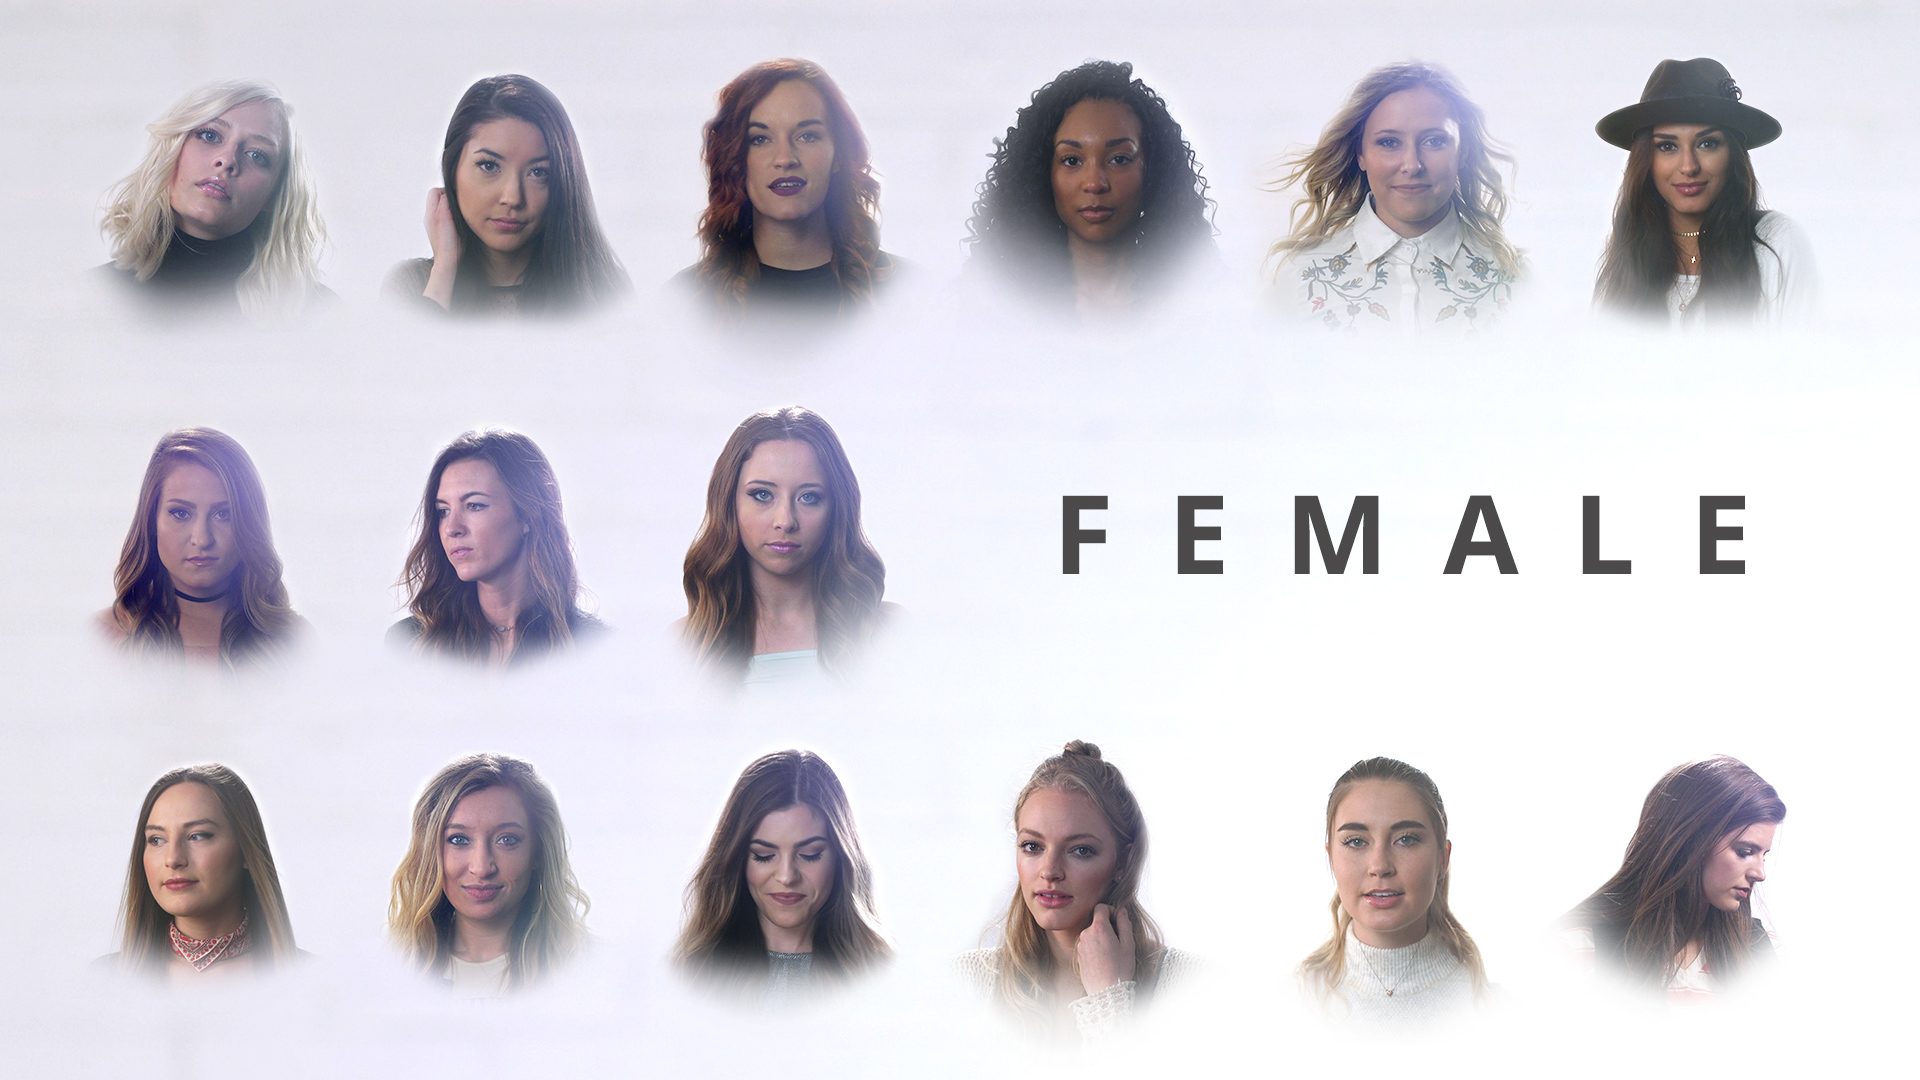 Song Suffragettes Release Powerful Cover of Keith Urban’s “Female”